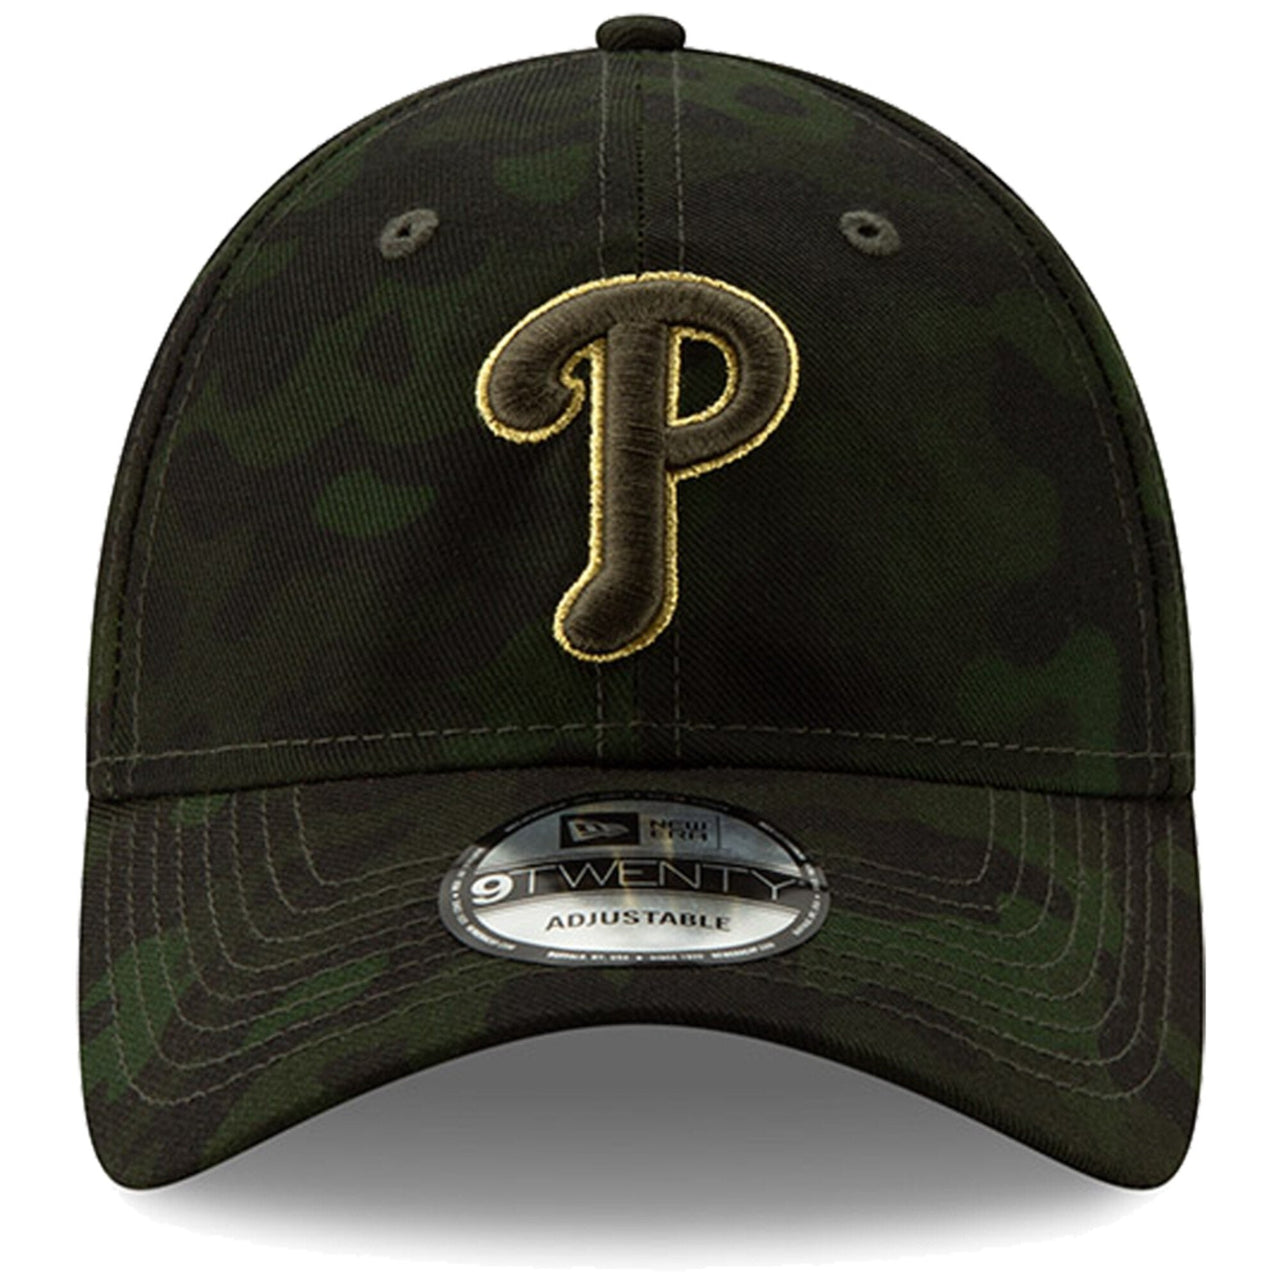 On the front of the Philadelphia Phillies 2019 Memorial Day 9Twenty Dad Hat is the Philadelphia Phillies logo in military green and metallic gold